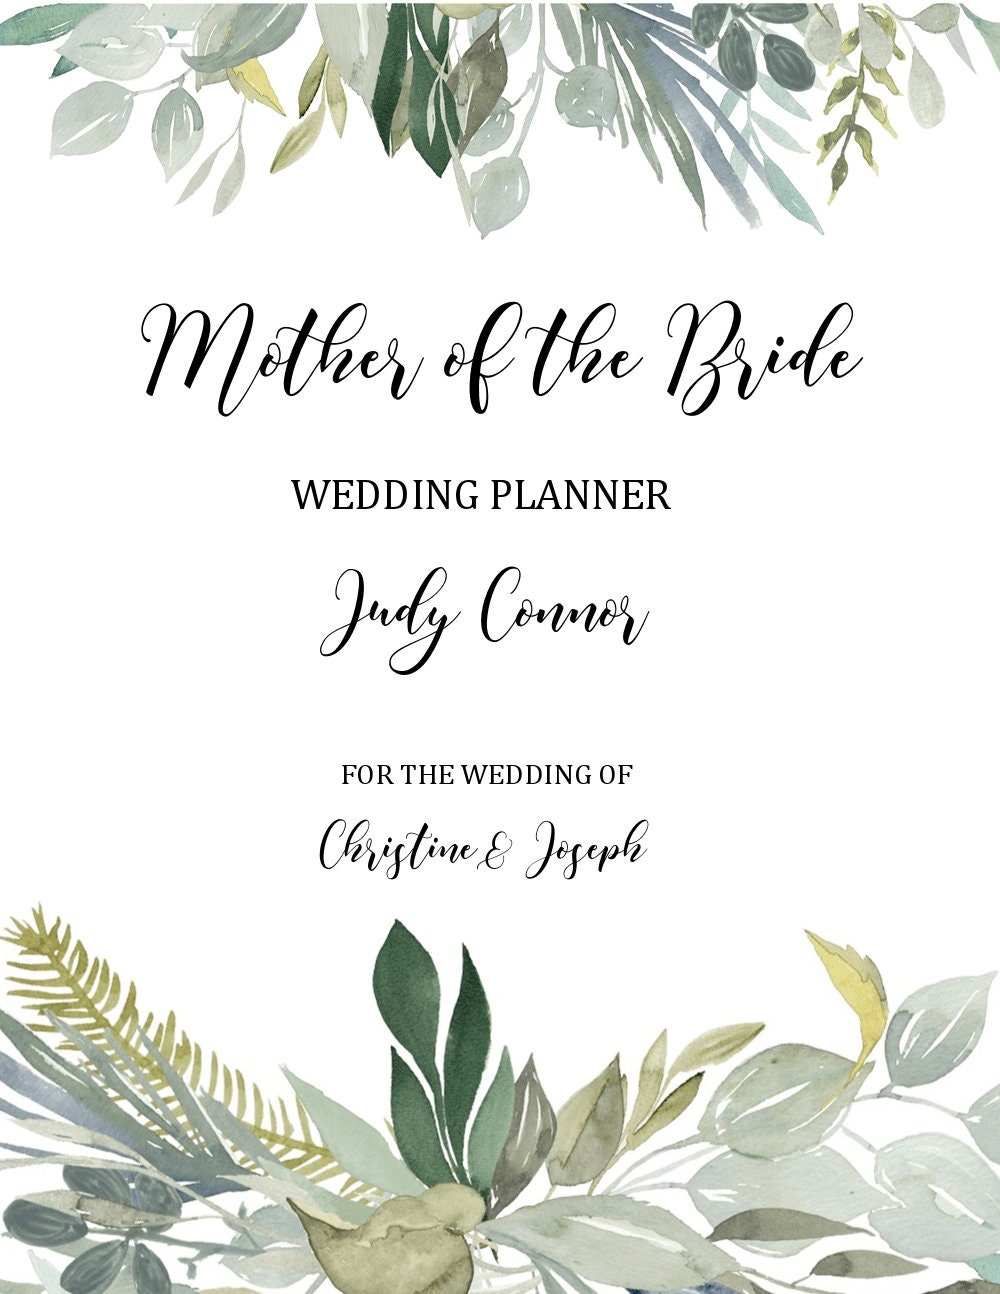 The Mother of the Bride Guide: A Modern Mom's Guide to Wedding Planning [Book]